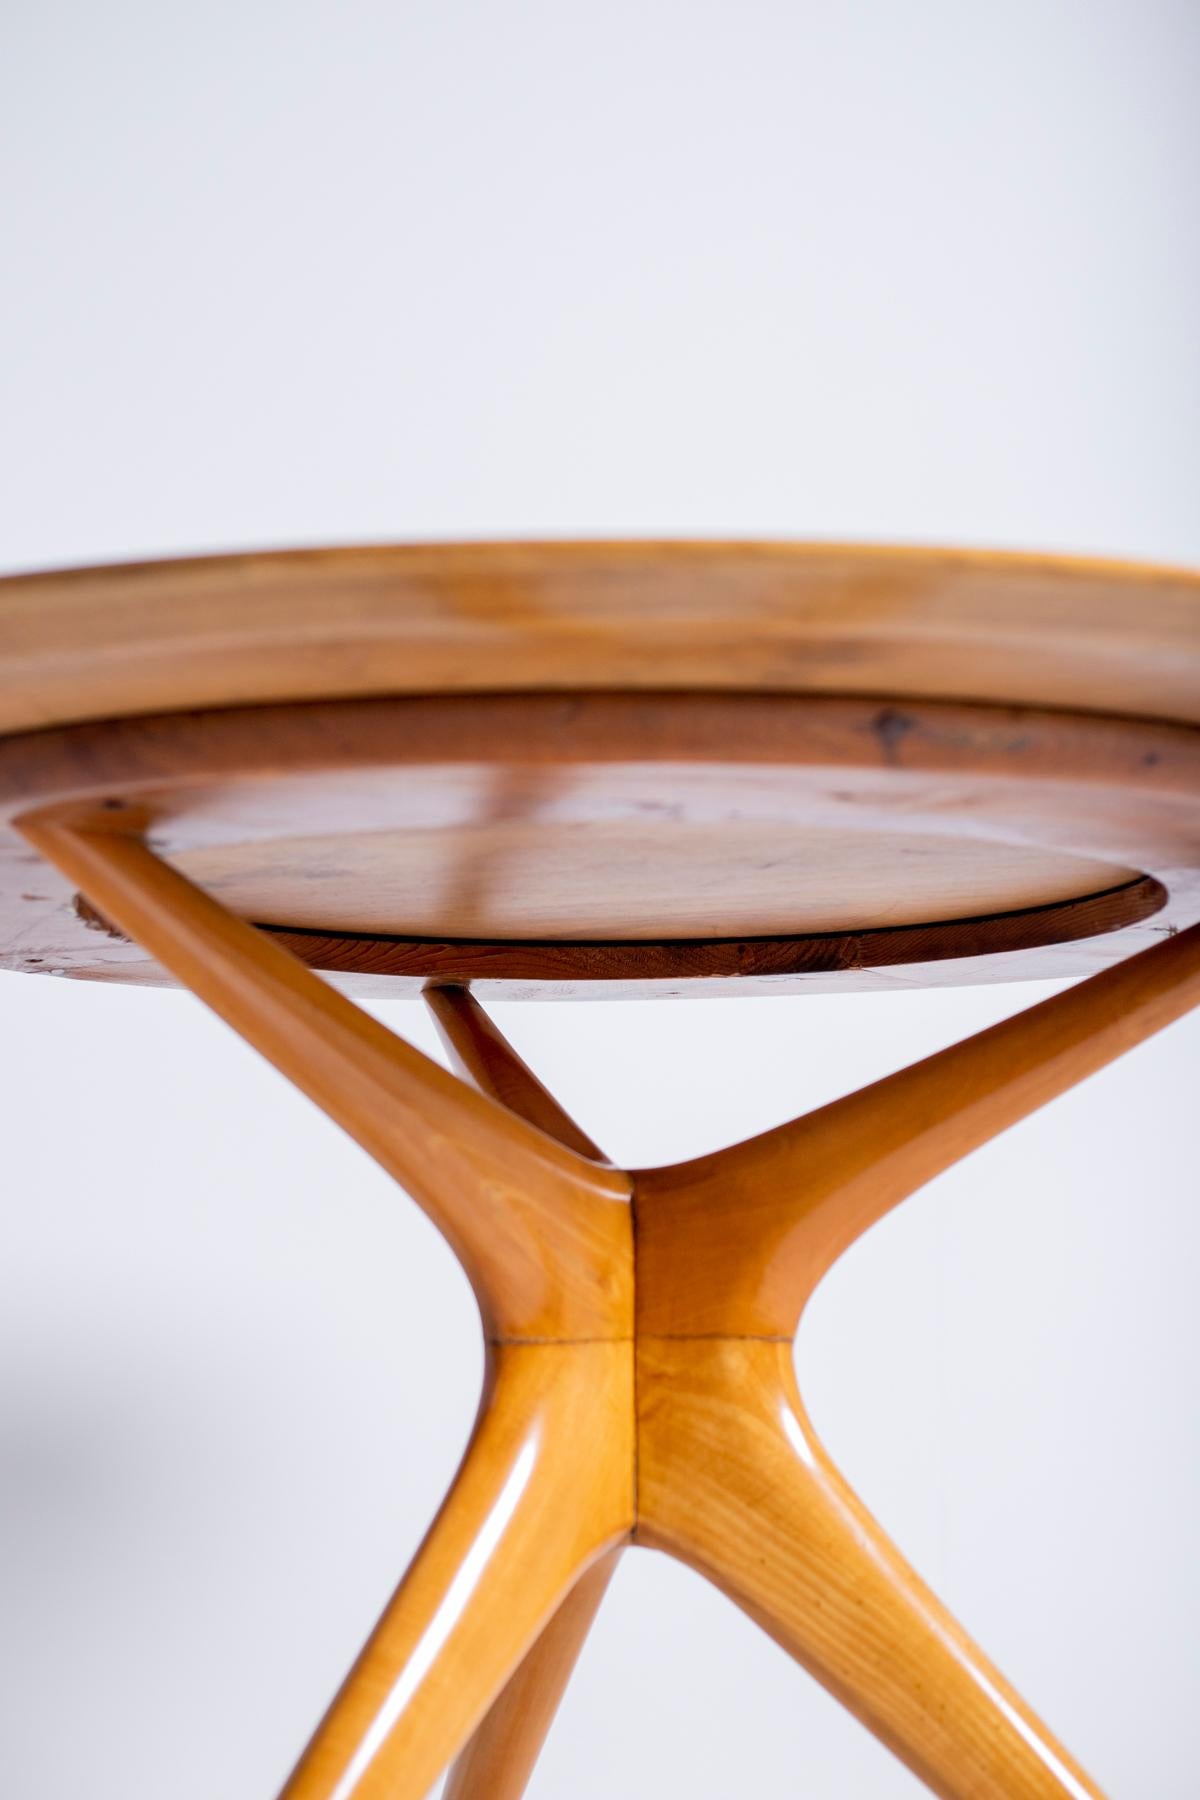 Mid-Century Modern Italian Midcentury Table by Ico Parisi for Fratelli Rizzi, 1950s Published